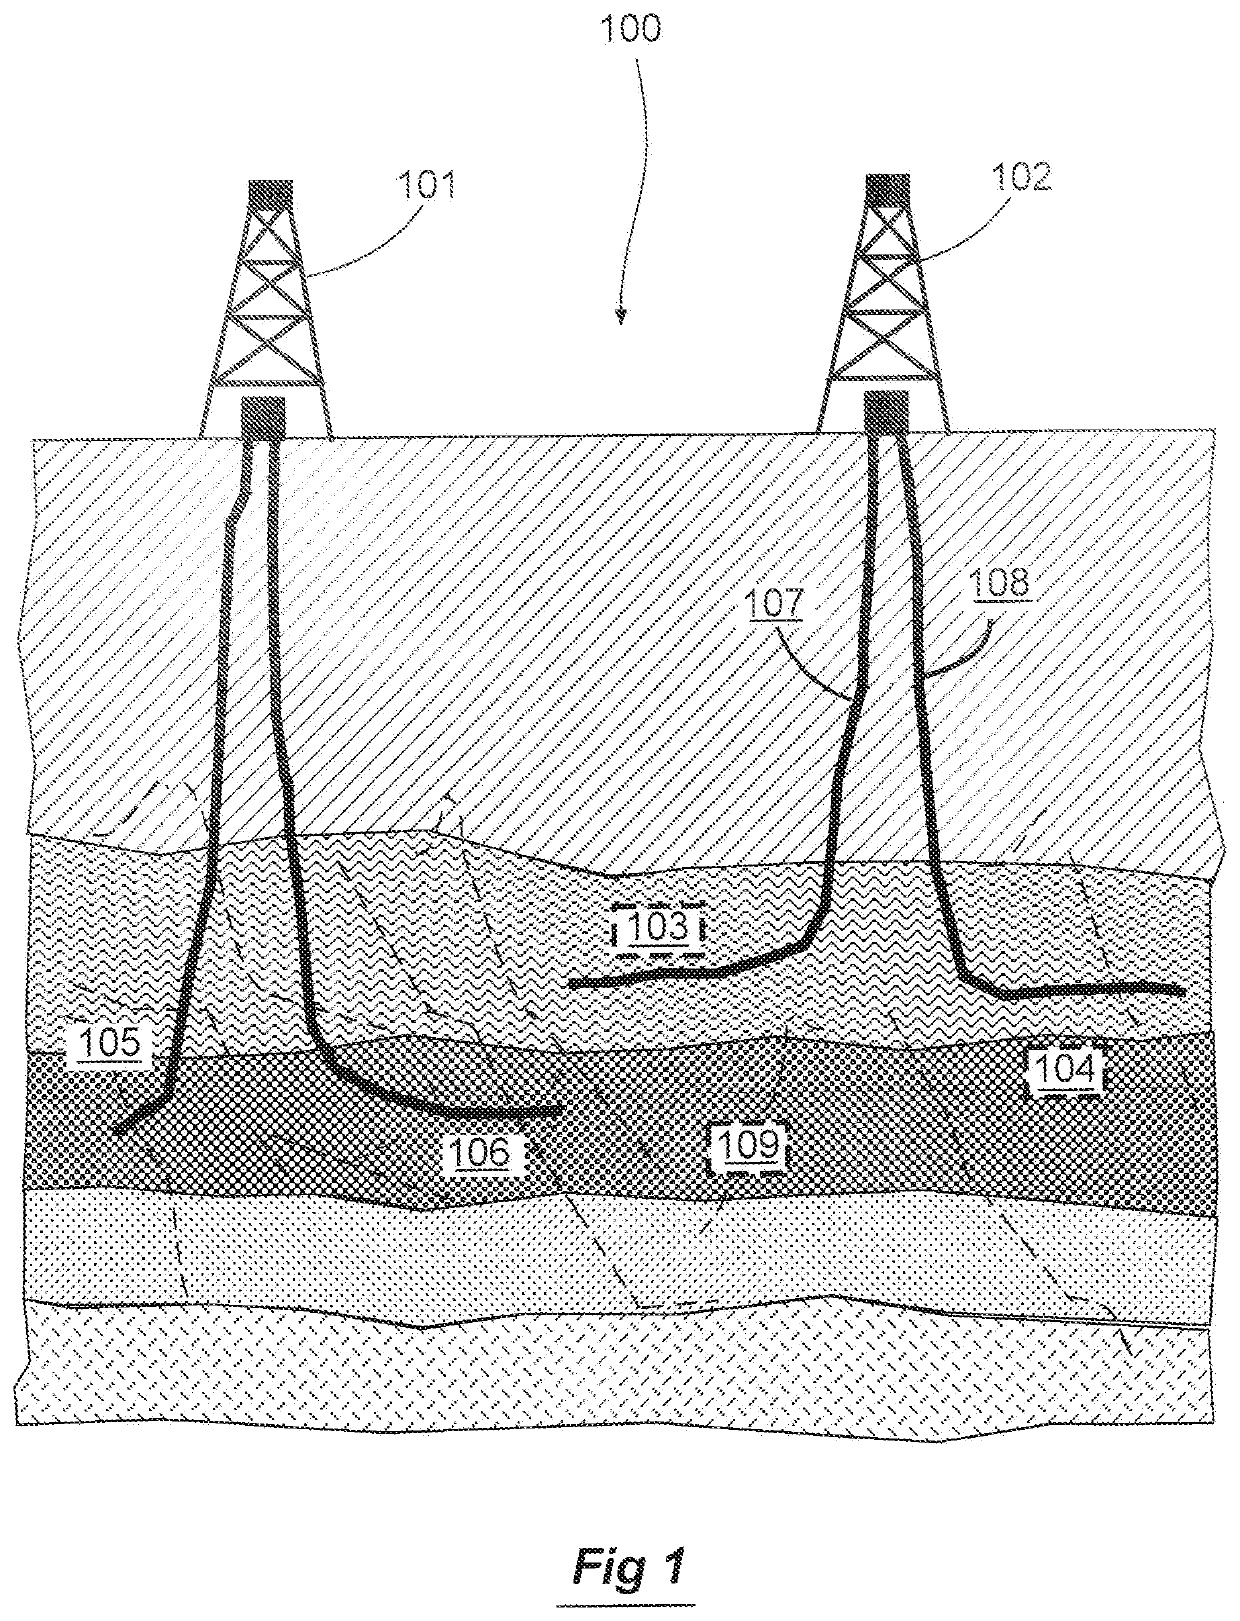 System for predicting induced seismicity potential resulting from injection of fluids in naturally fractured reservoirs